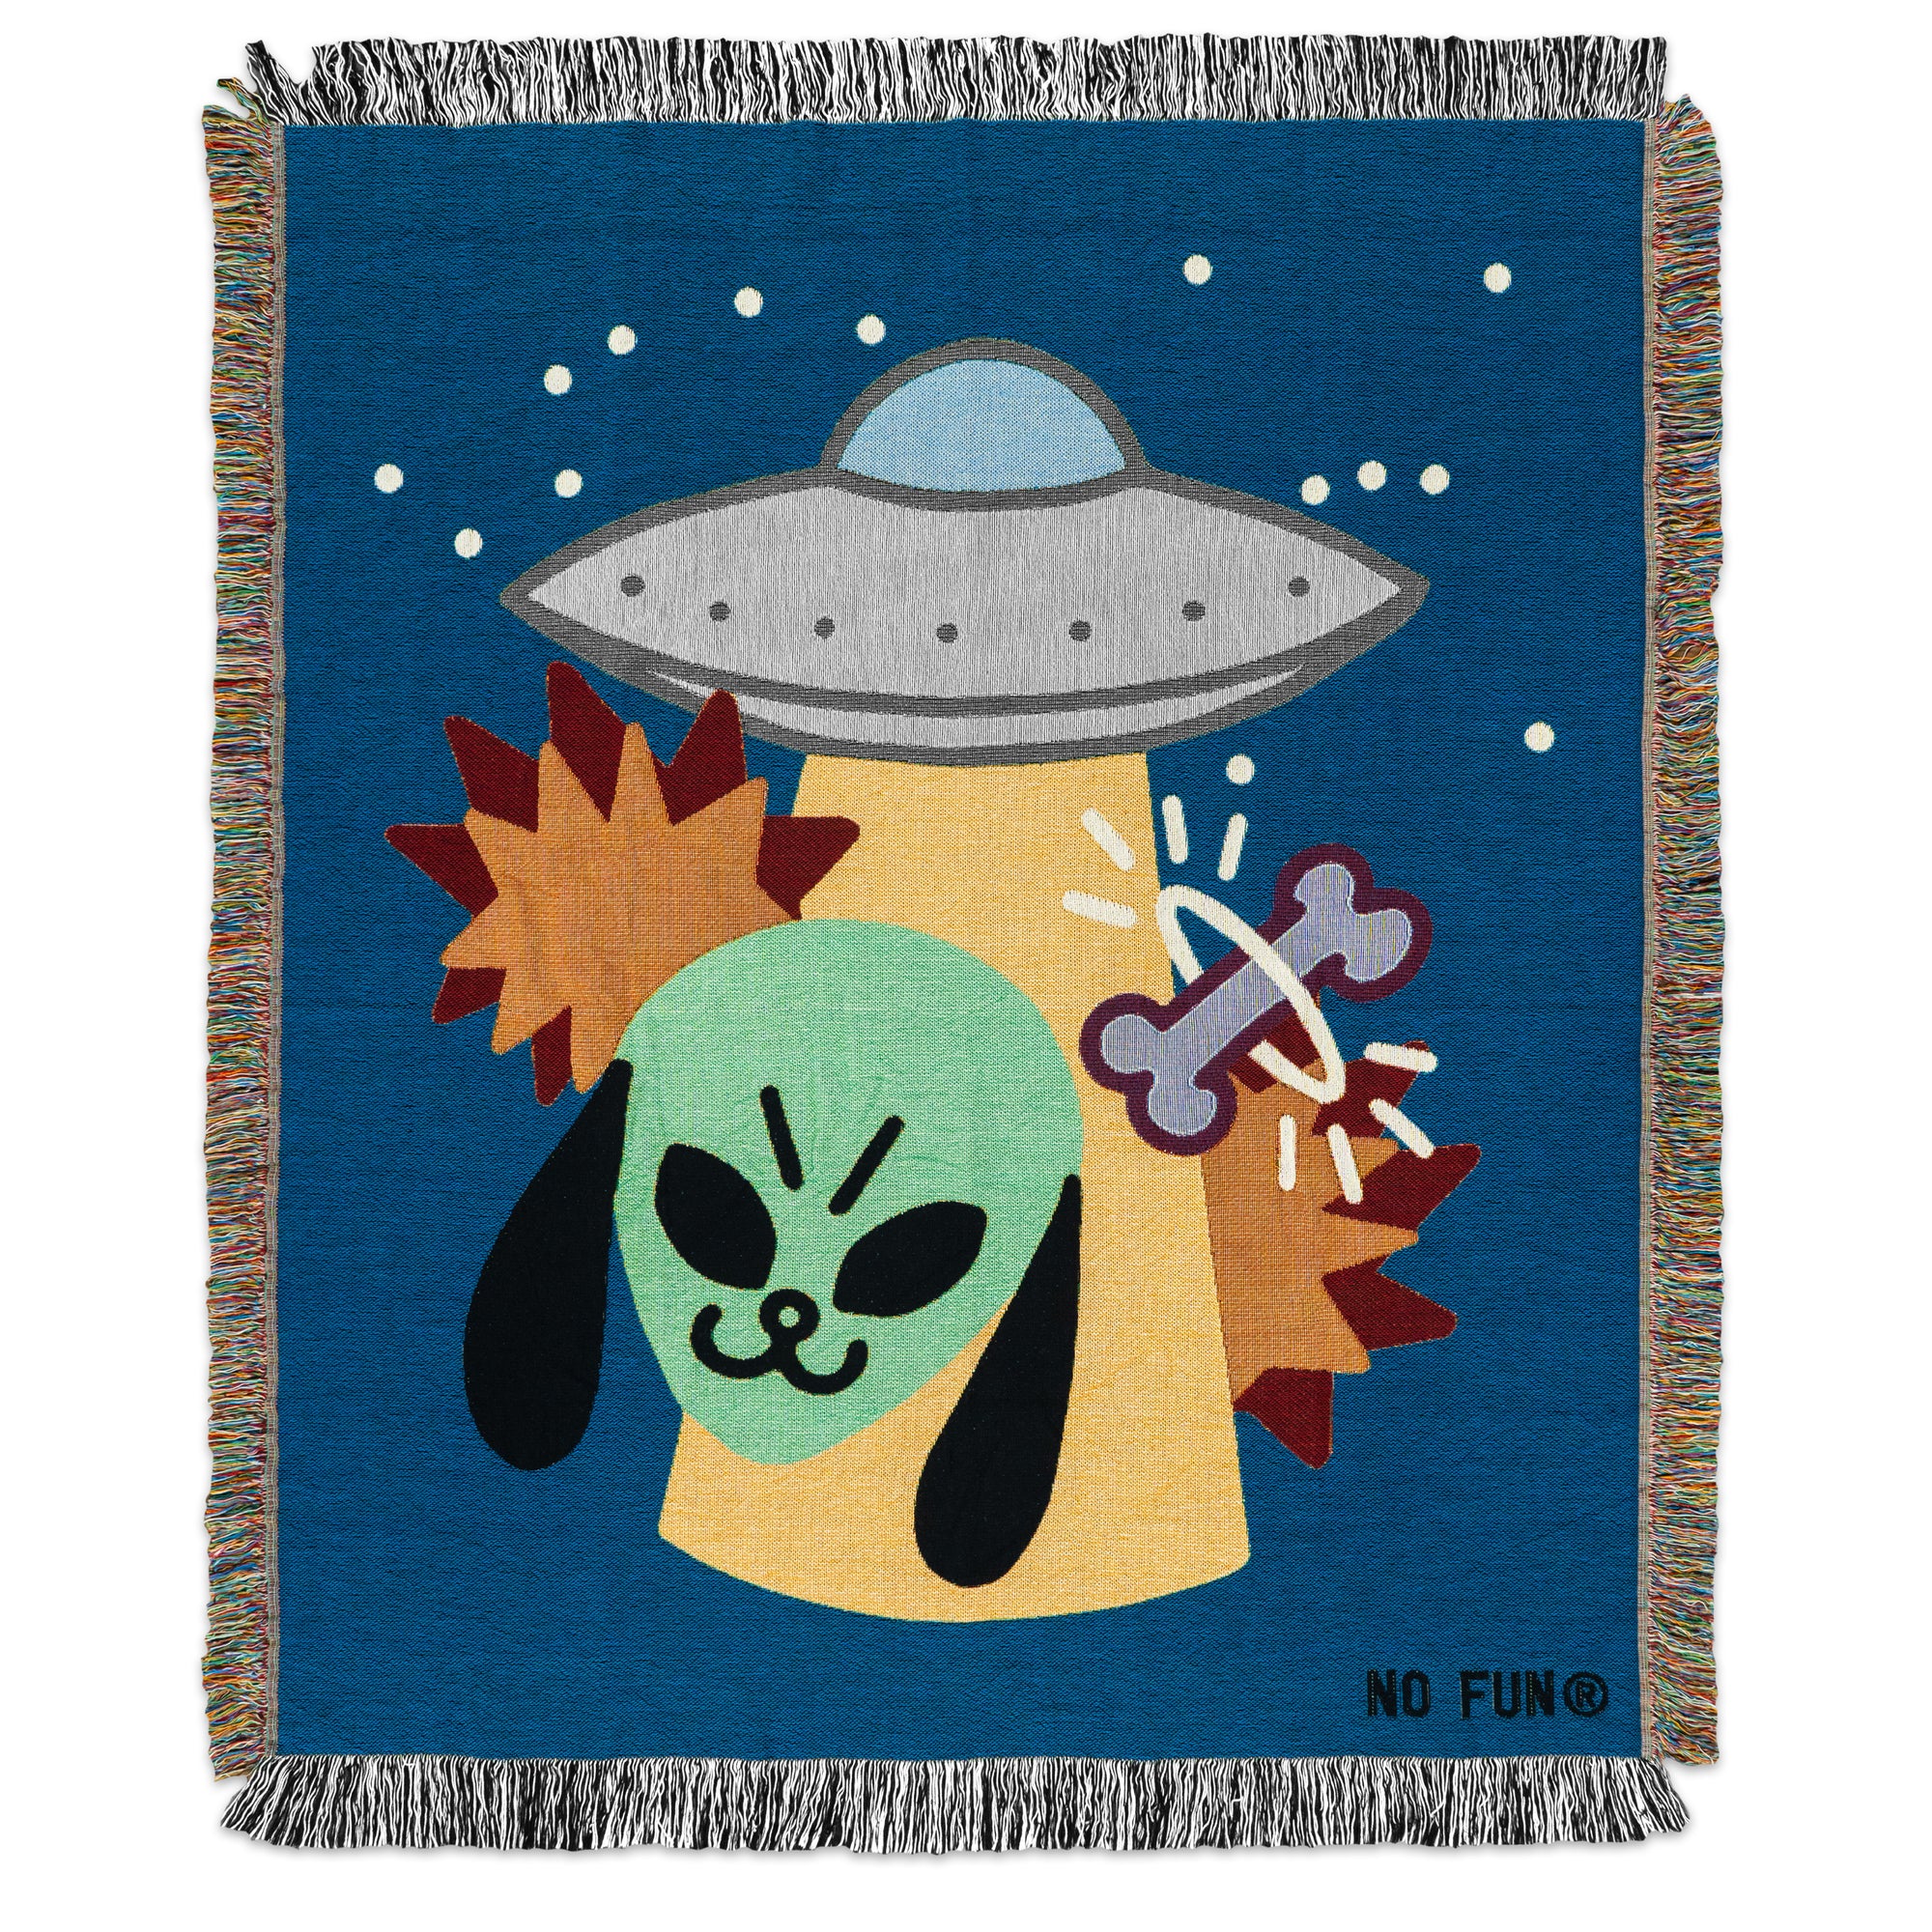 "Space Dog" Woven Blanket